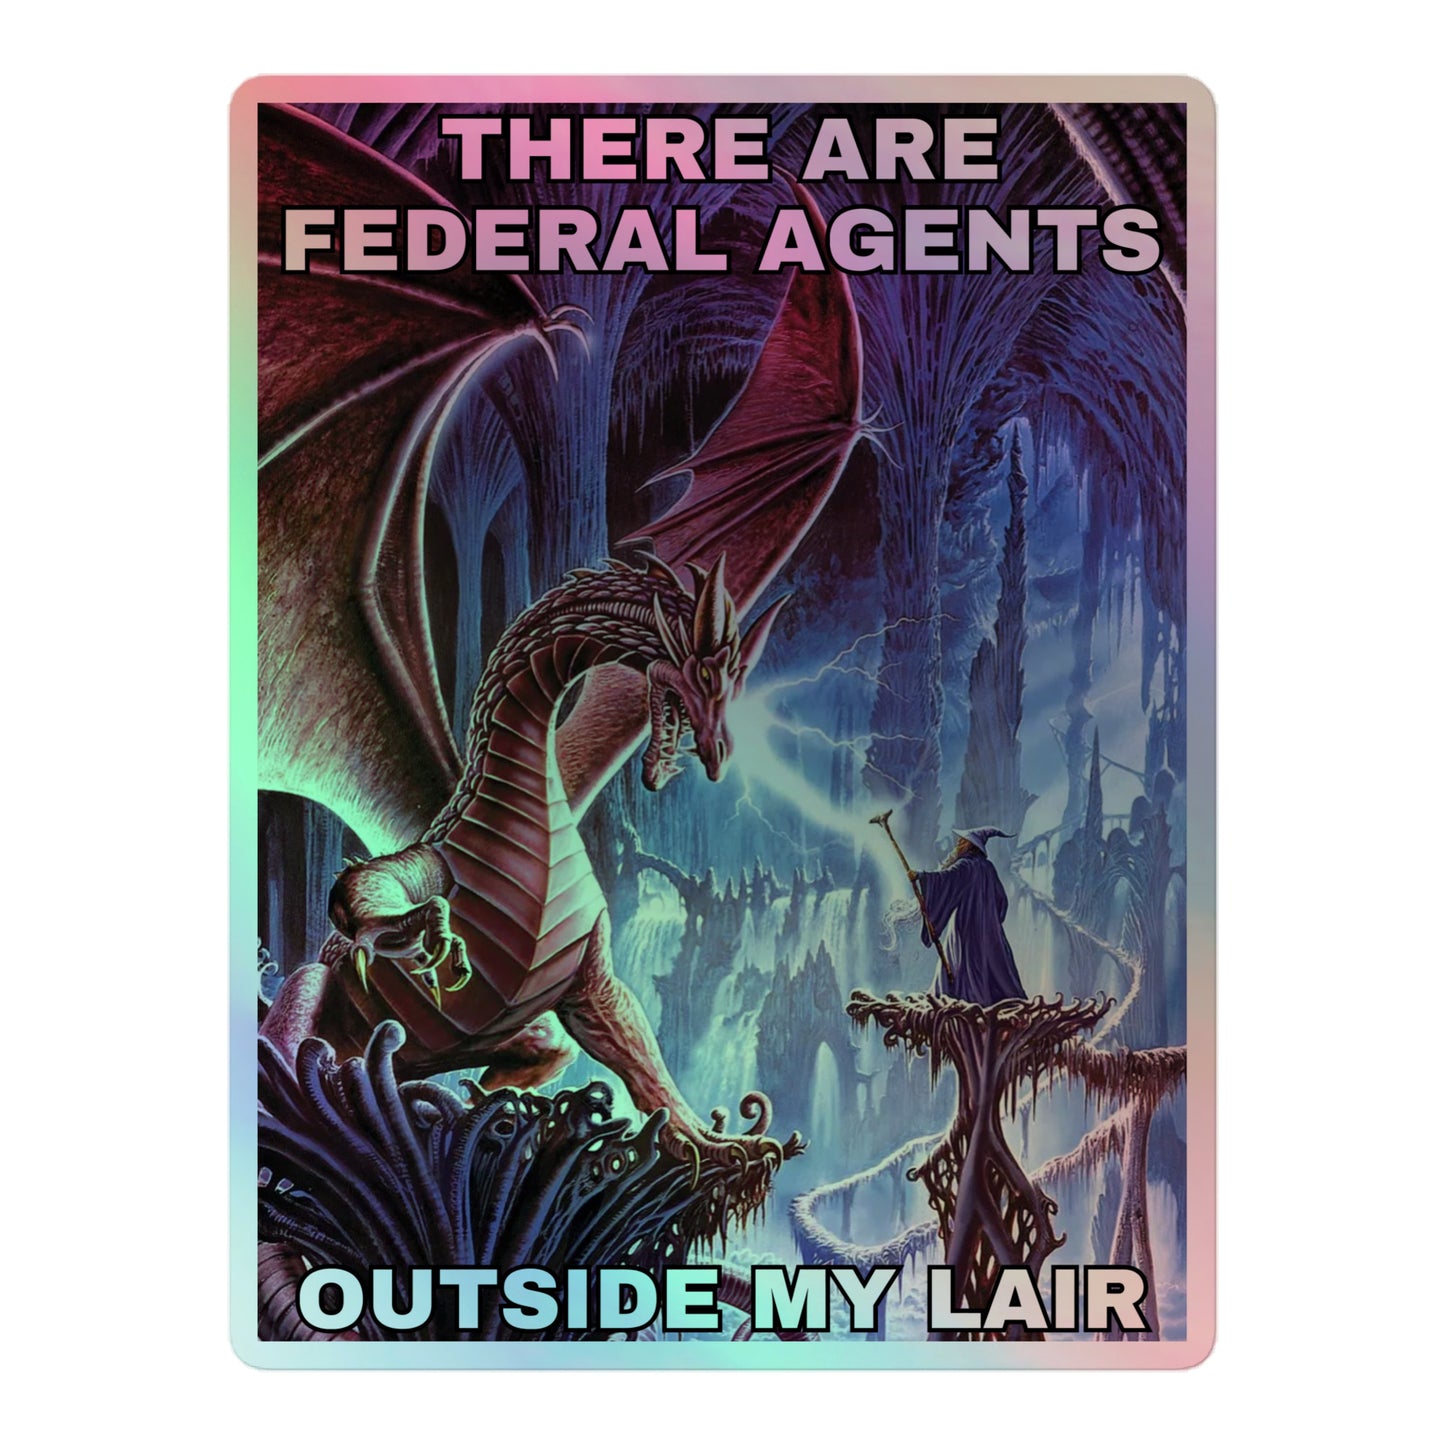 There are federal agents outside my lair (sticker)